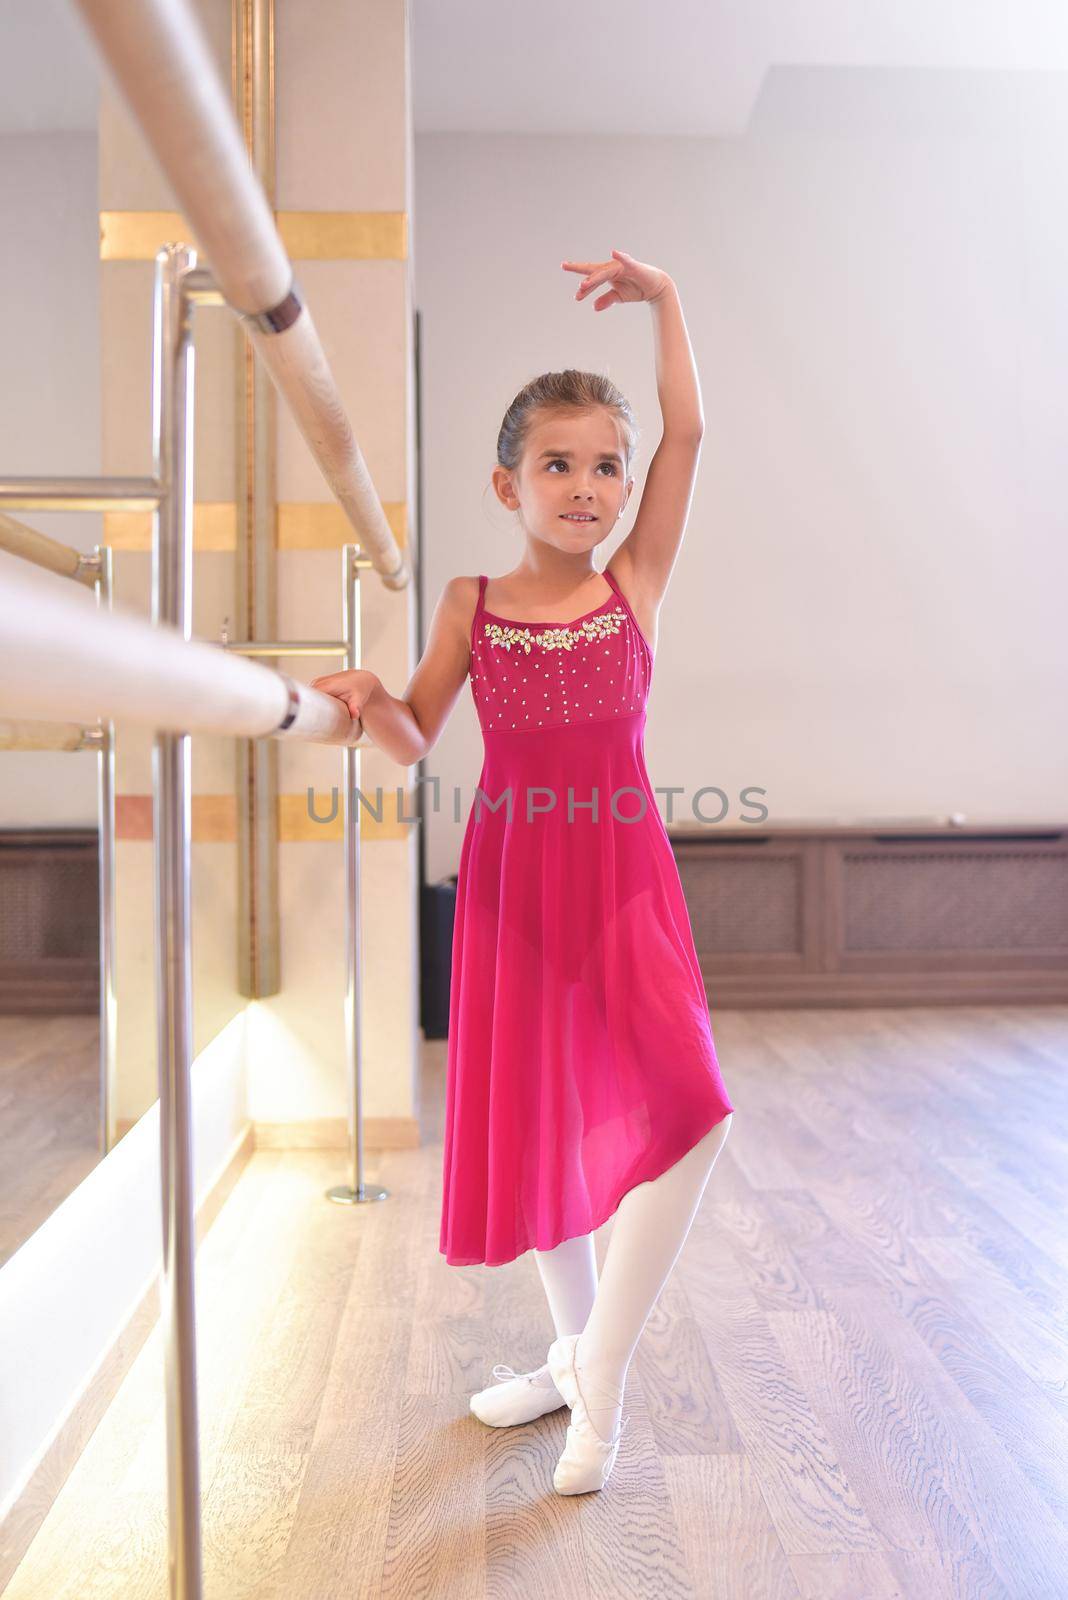 charming little girl dreams of becoming a ballerina. The girl in the pink dress is dancing, holding on to the bar.Baby girl is studying ballet. by Nickstock